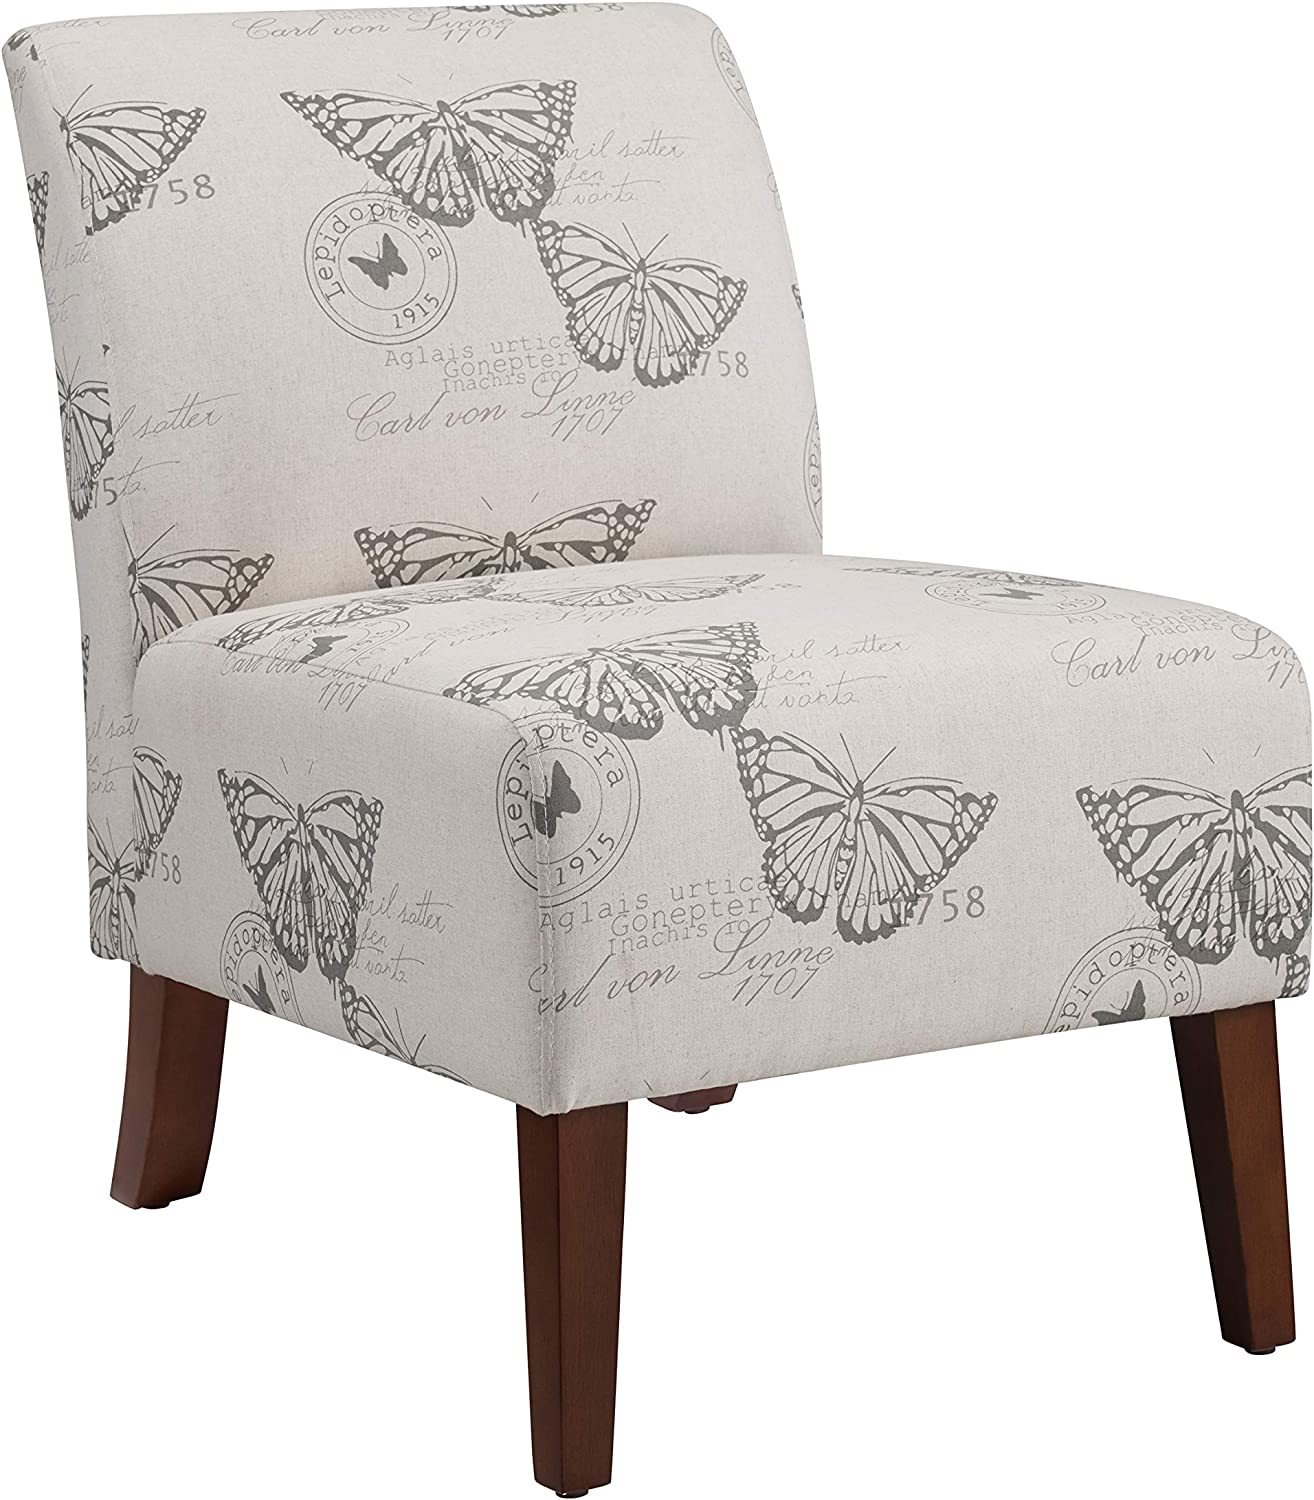 Primary image for Dark Espresso Linen Lily Chair By Linon Butterfly, 21" Wide X 29" Deep X 31"